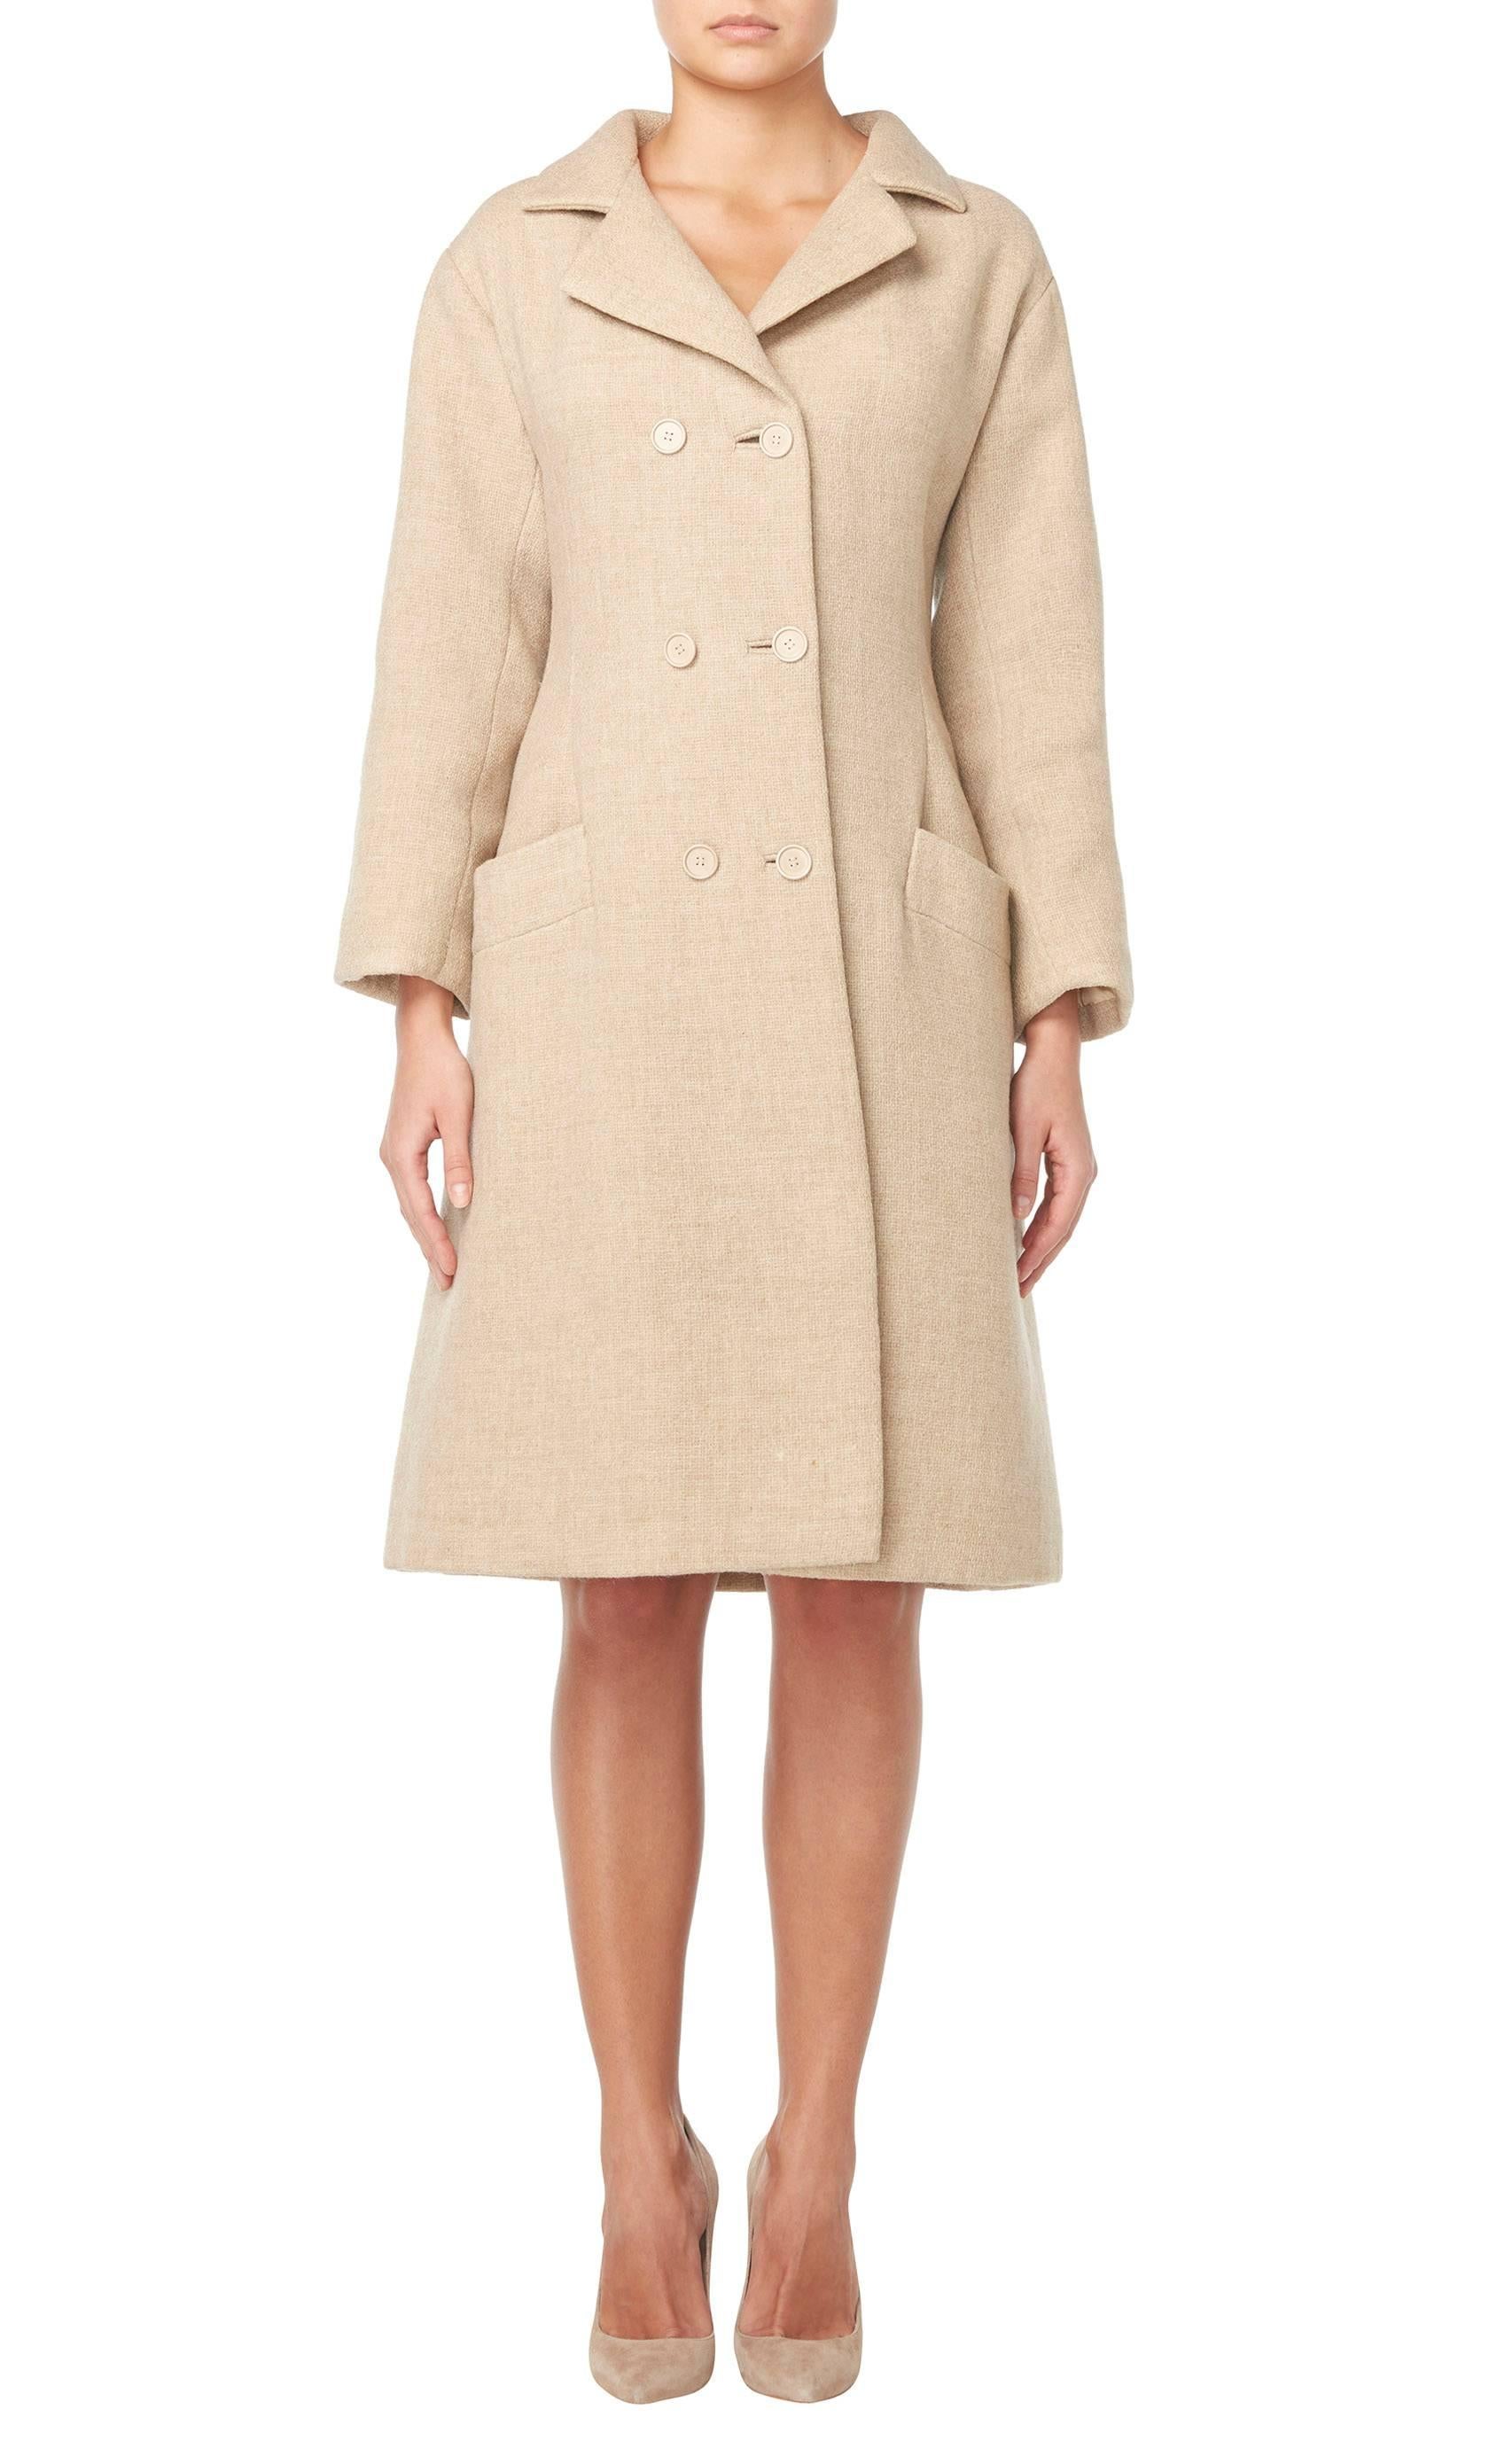 This sharply tailored haute couture coat by Balenciaga for his Eisa label will be sure to become a wardrobe staple. Constructed in a gorgeous shade of oatmeal wool the double-breasted coat features a double lapel collar and a half belt to the rear.